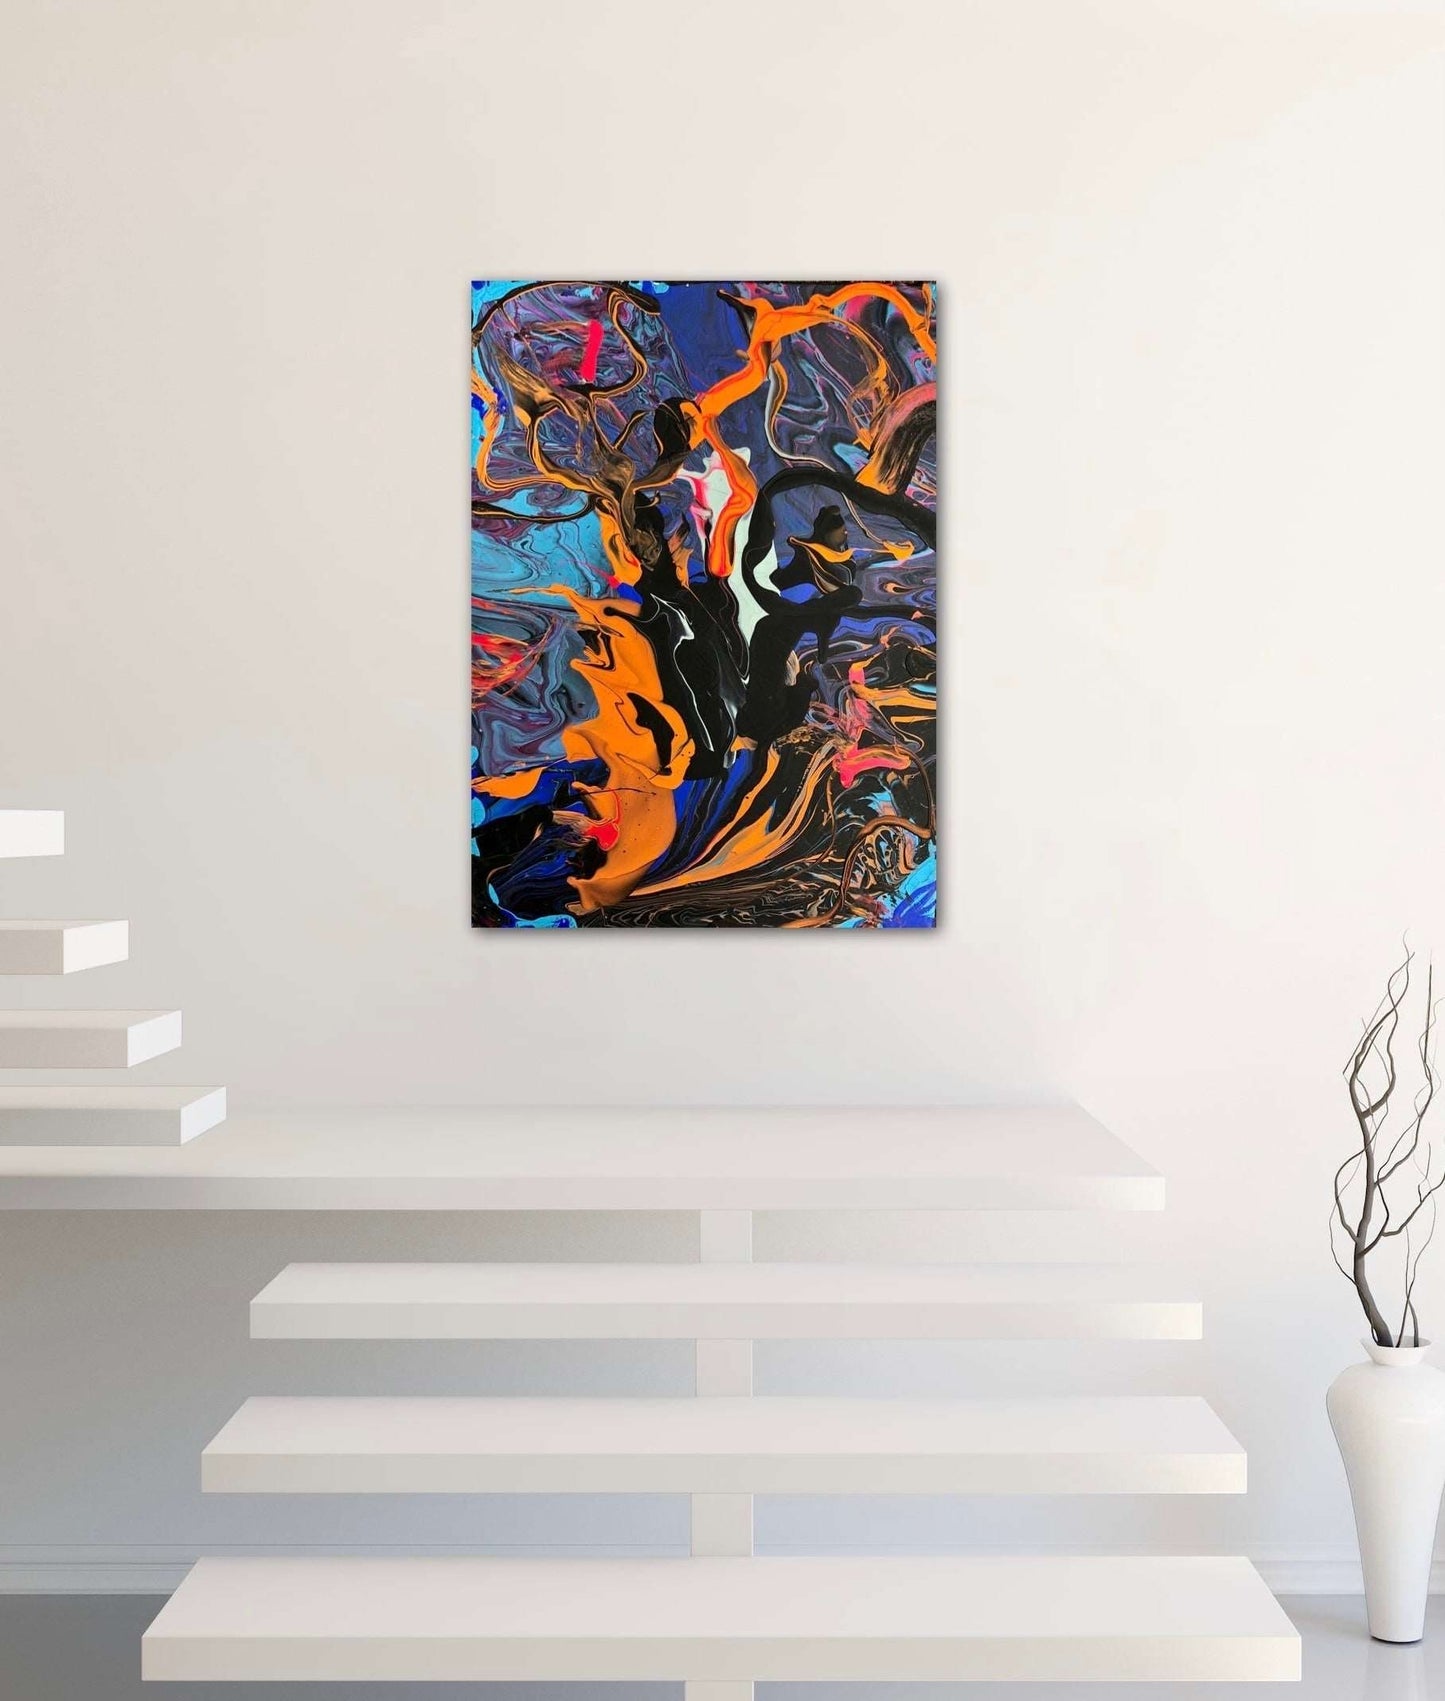 Under The Sea - Bright And Bold, Large Size, Textured Acrylic, Abstract Painting With Orange Accents, by Art with Evie